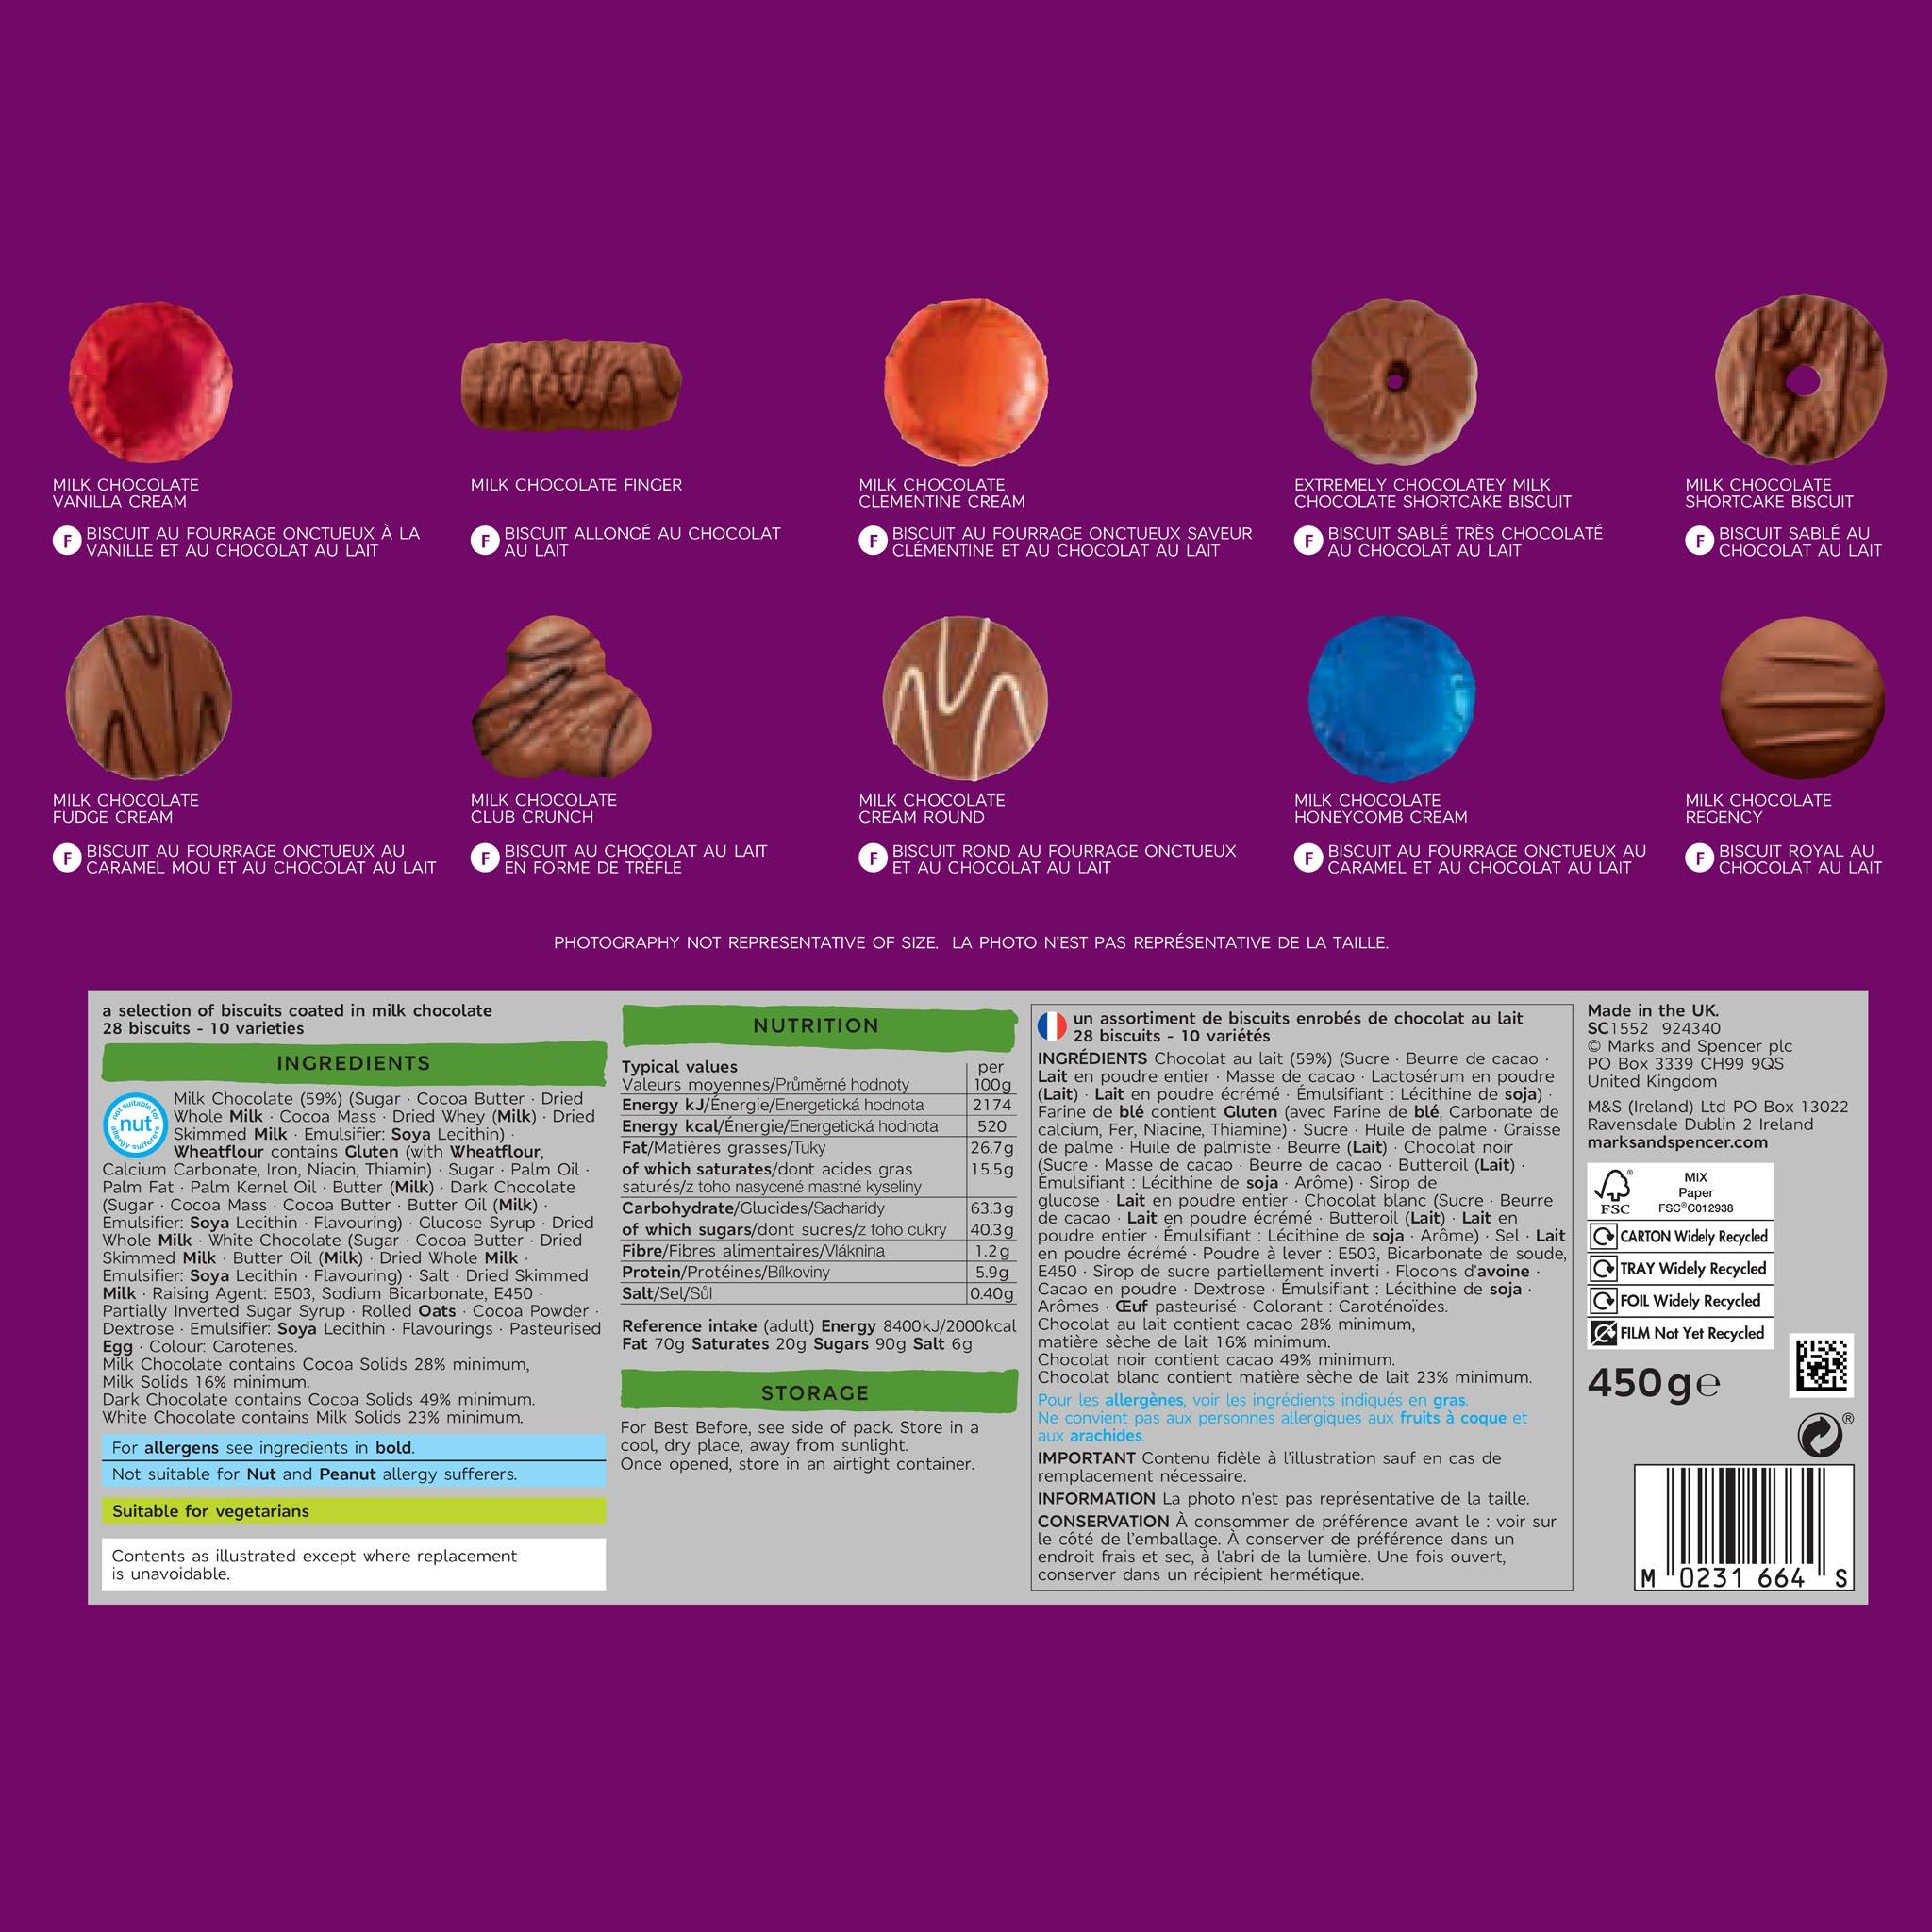 Extremely Chocolatey Milk Chocolate Biscuits 450g Label